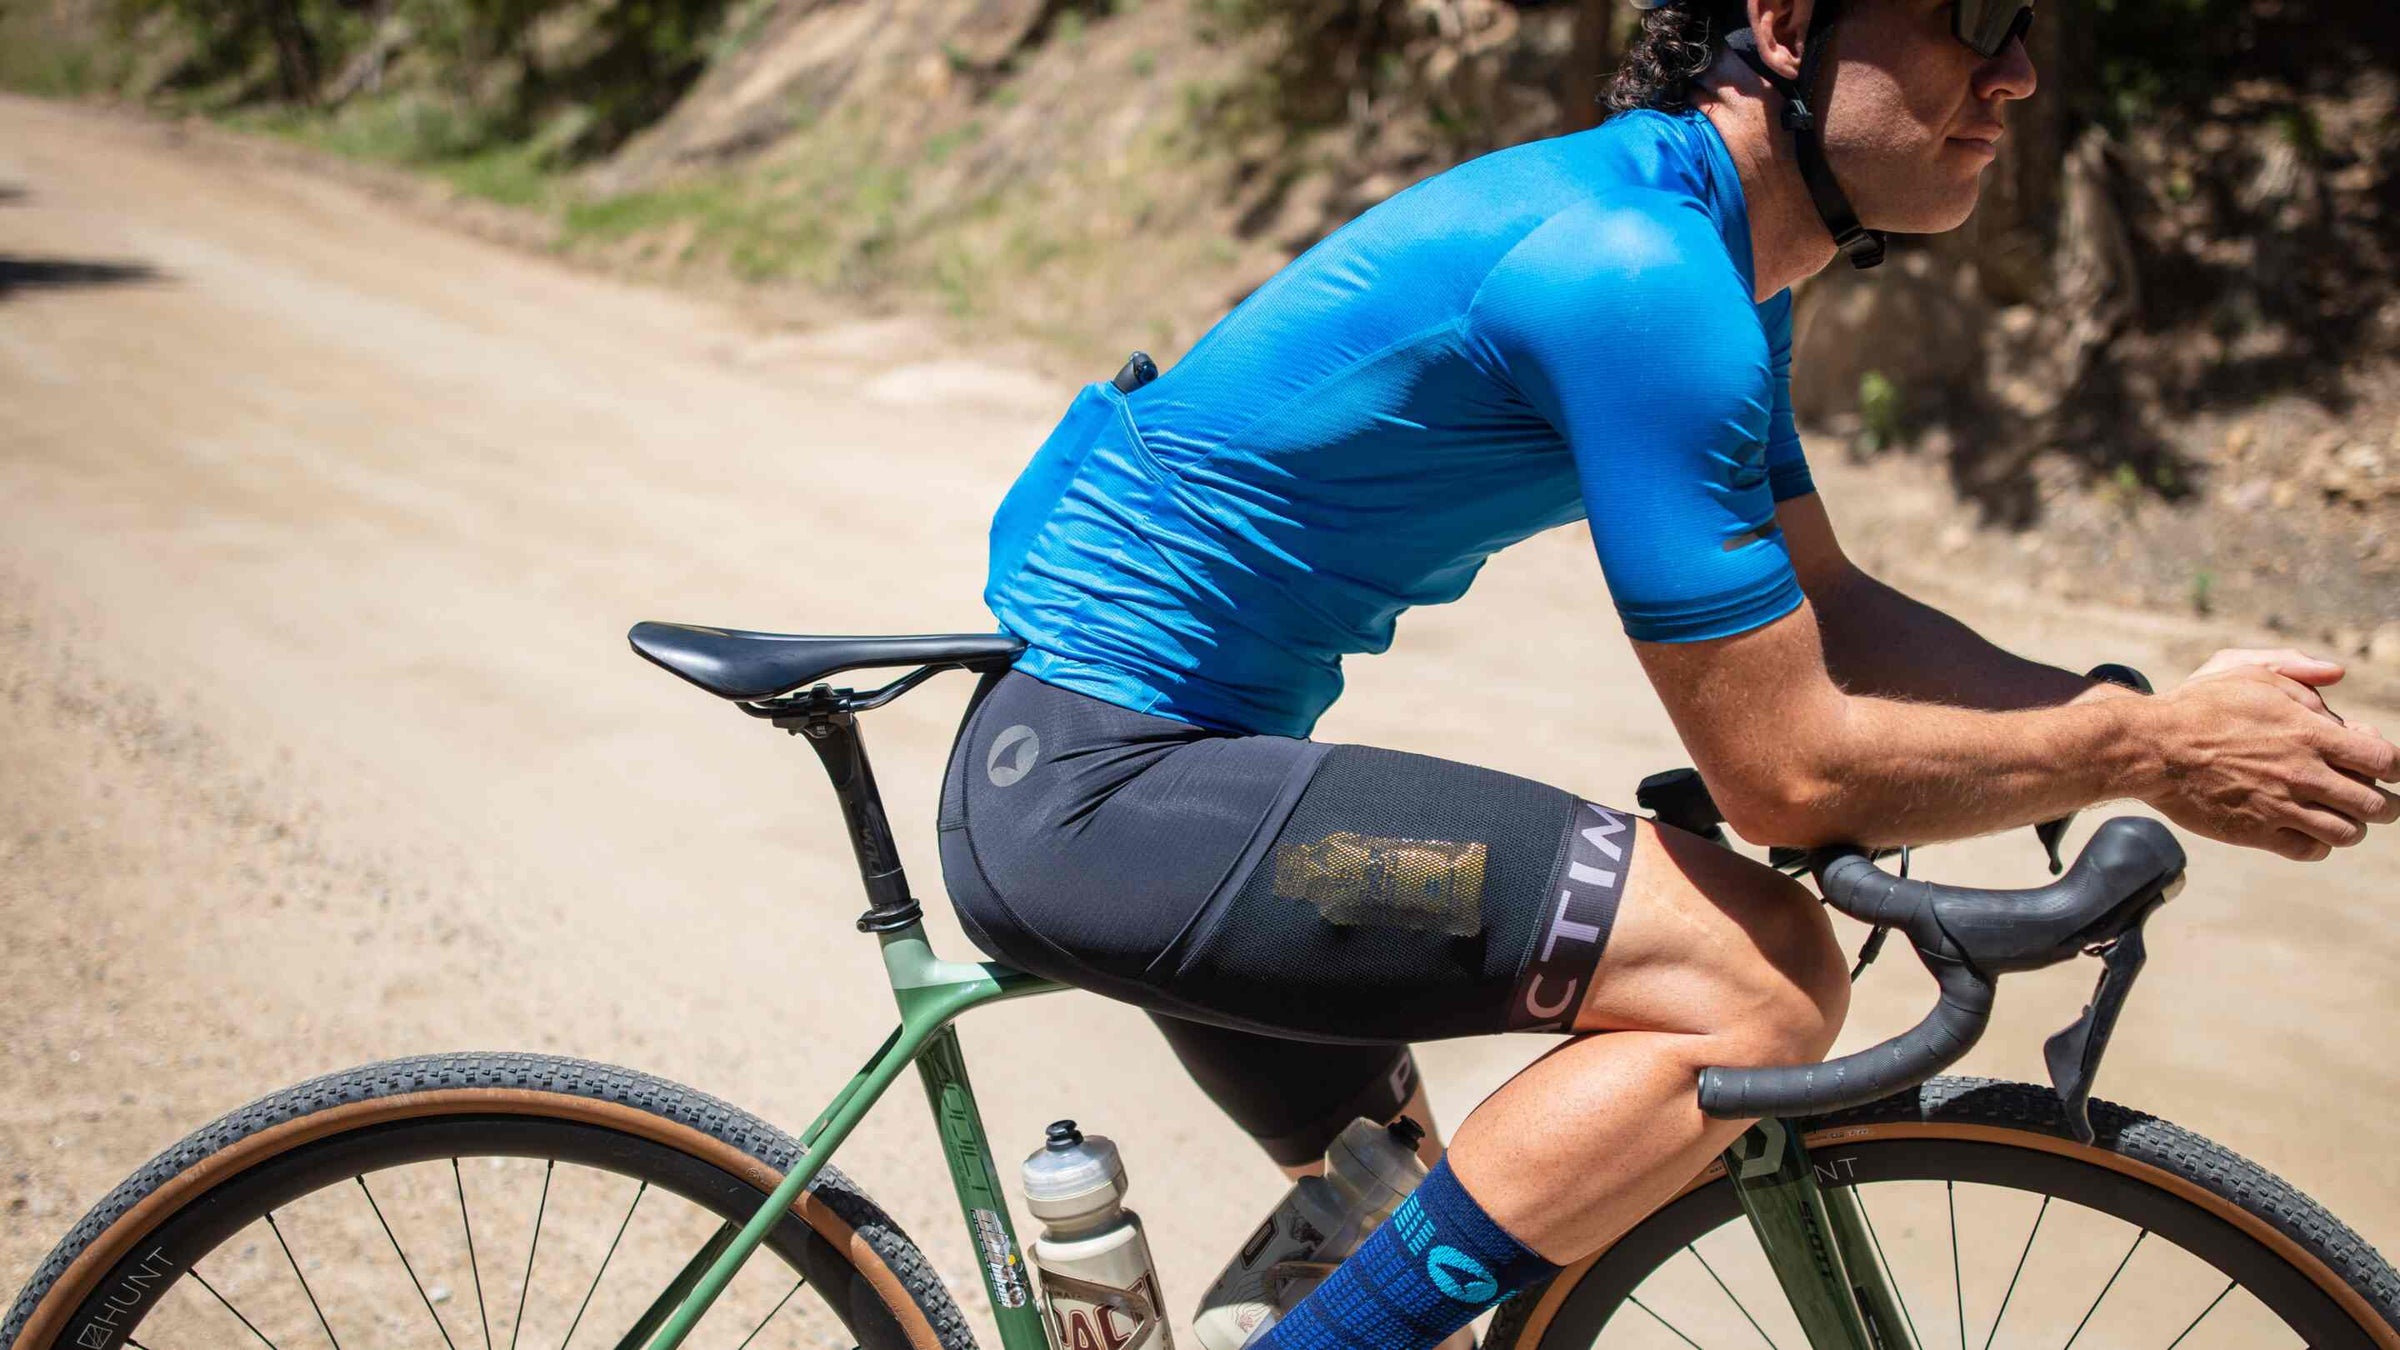 Men's Cargo Bibs with Pockets from Pactimo